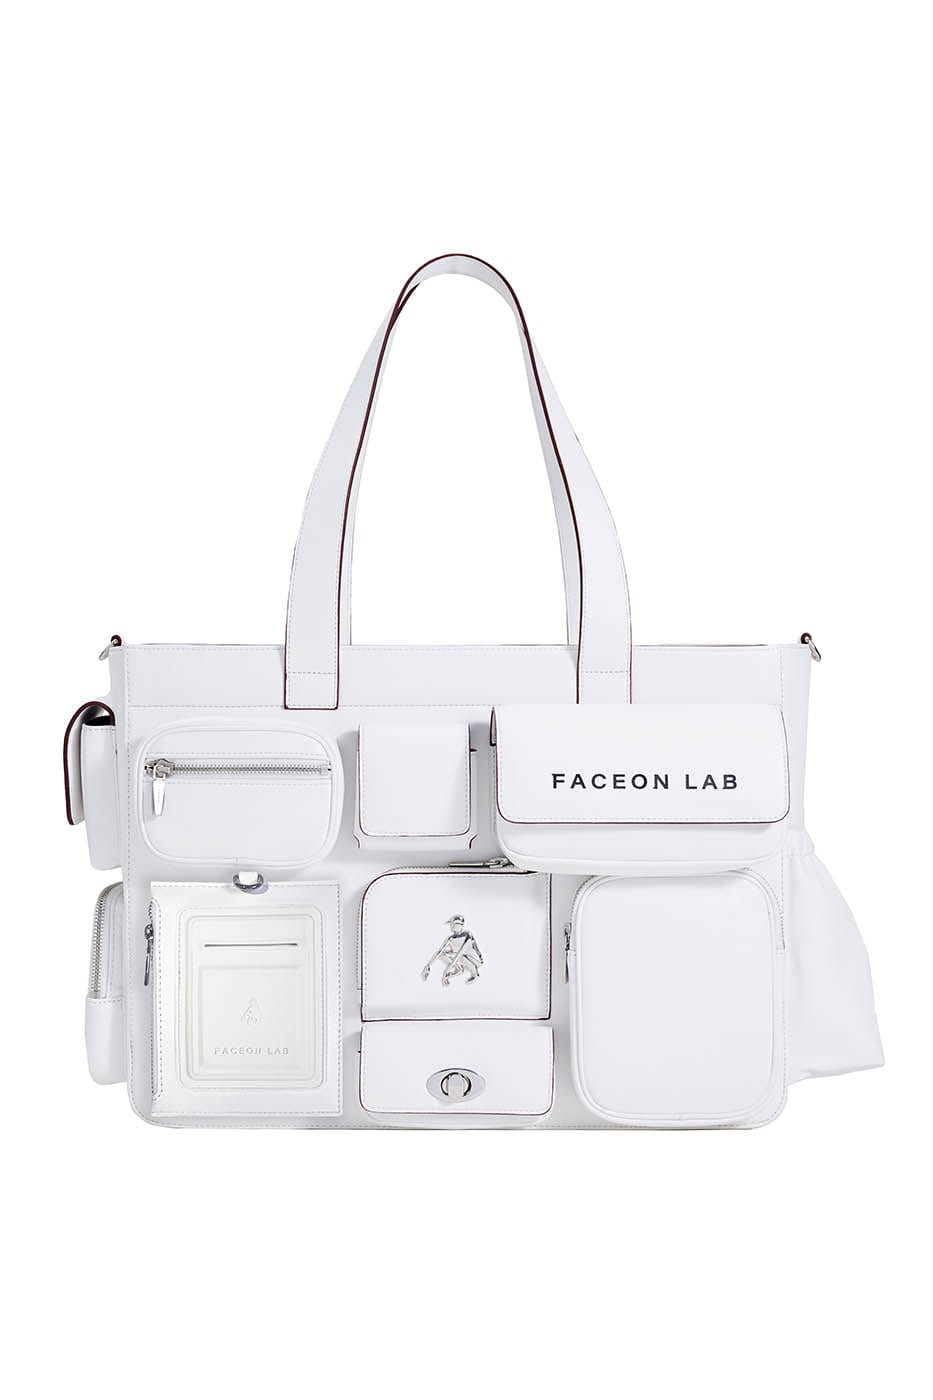 FACEONLAB Multi-Pocket Faux Leather Tote Bag, premium urban and streetwear designers apparel on PROJECTISR.com, FACEONLAB